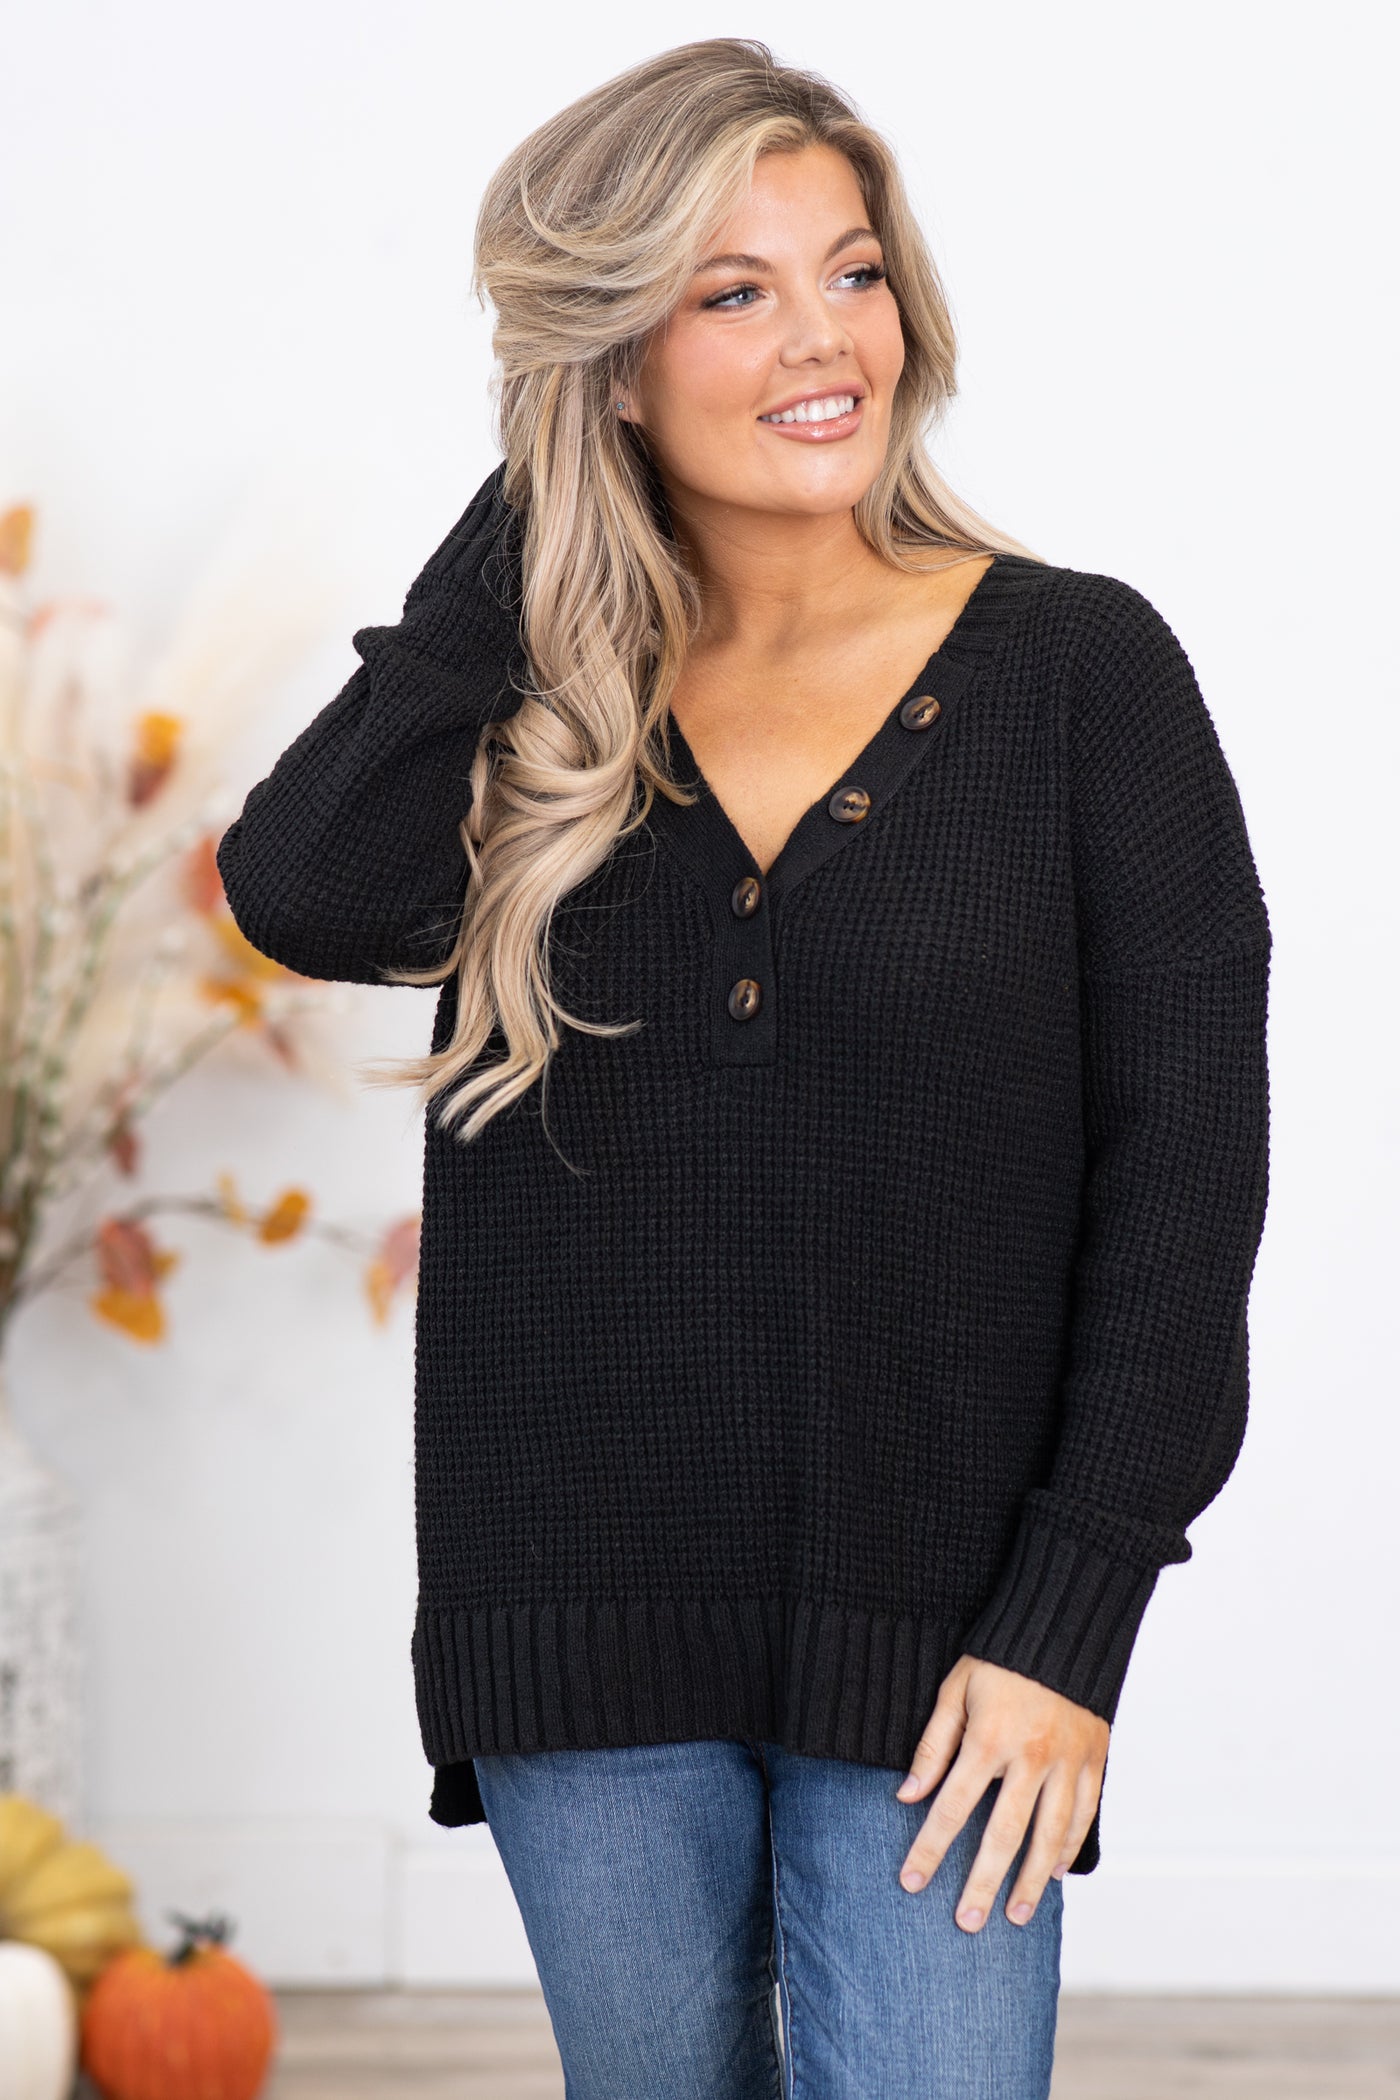 Black Waffle Knit Sweater With Buttons